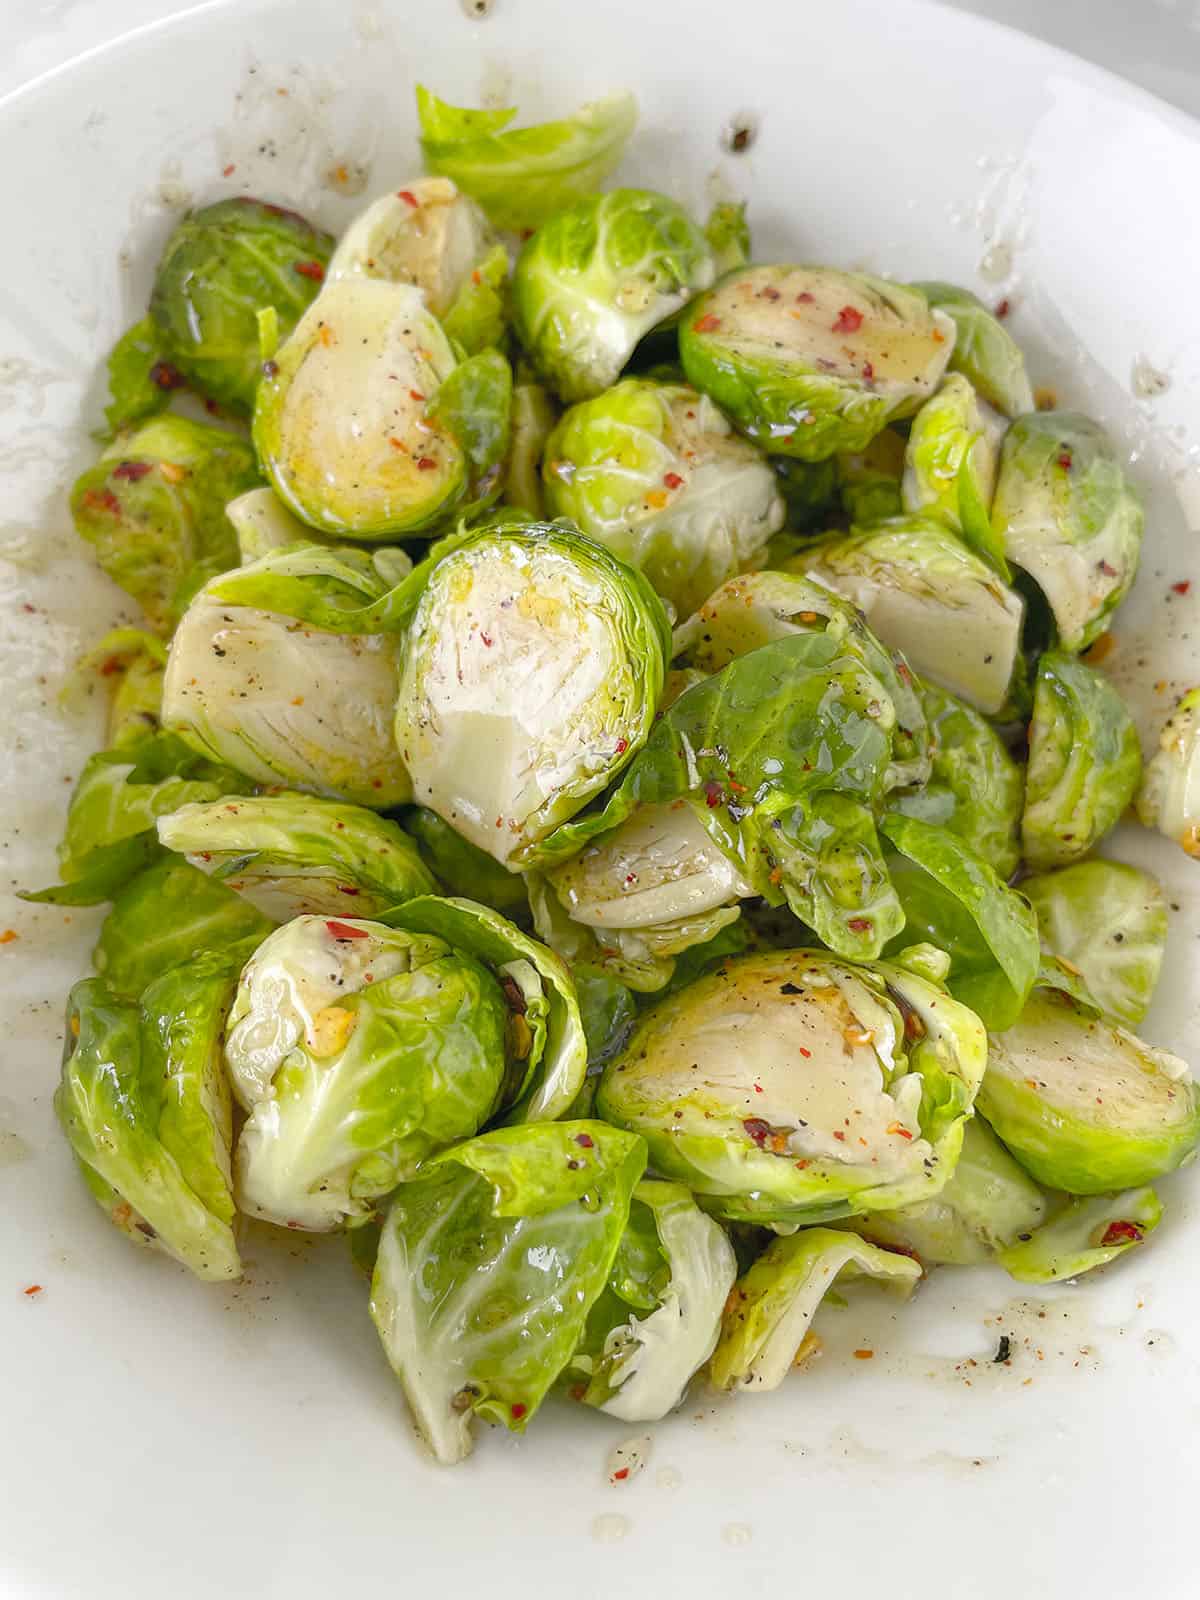 The hot honey added to the sprouts in a white bowl. 